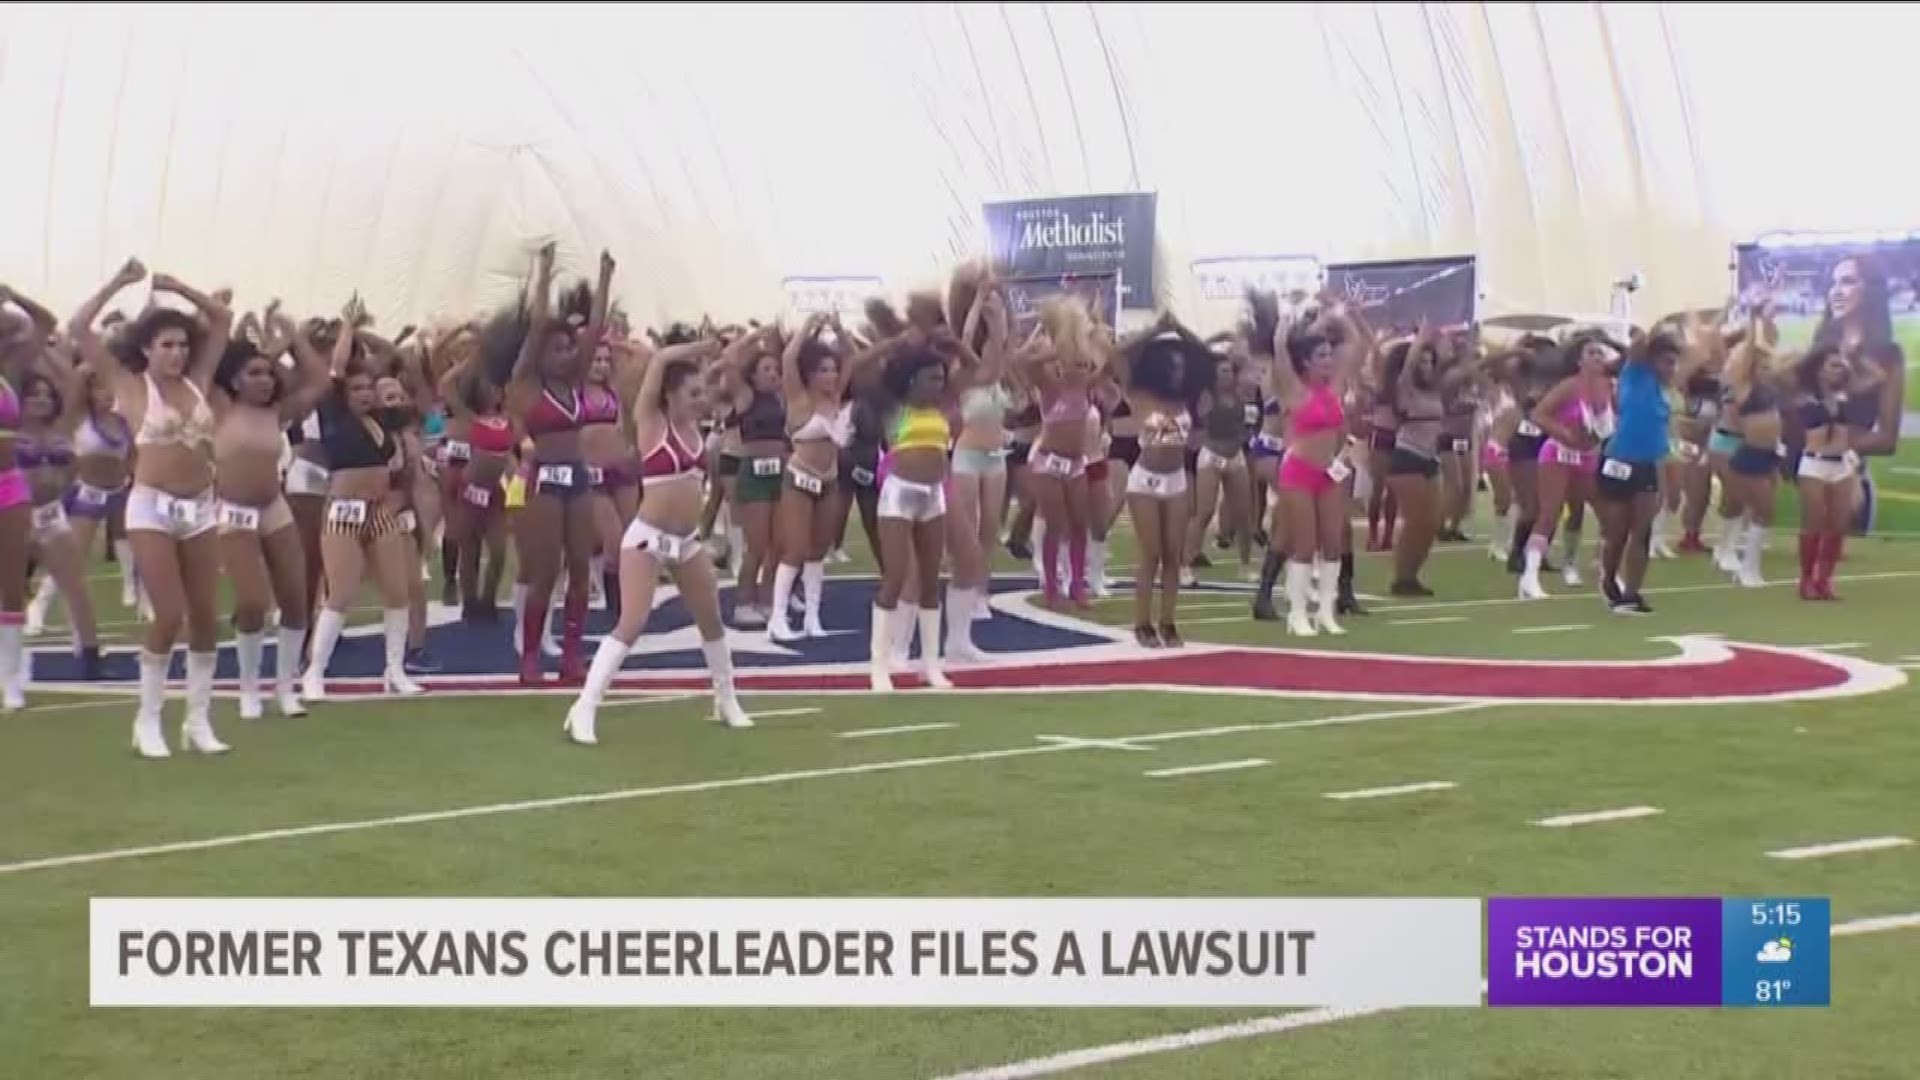 A former Houston Texans cheerleader filed a lawsuit this week claiming she and other women were verbally abused and did not receive fair pay.